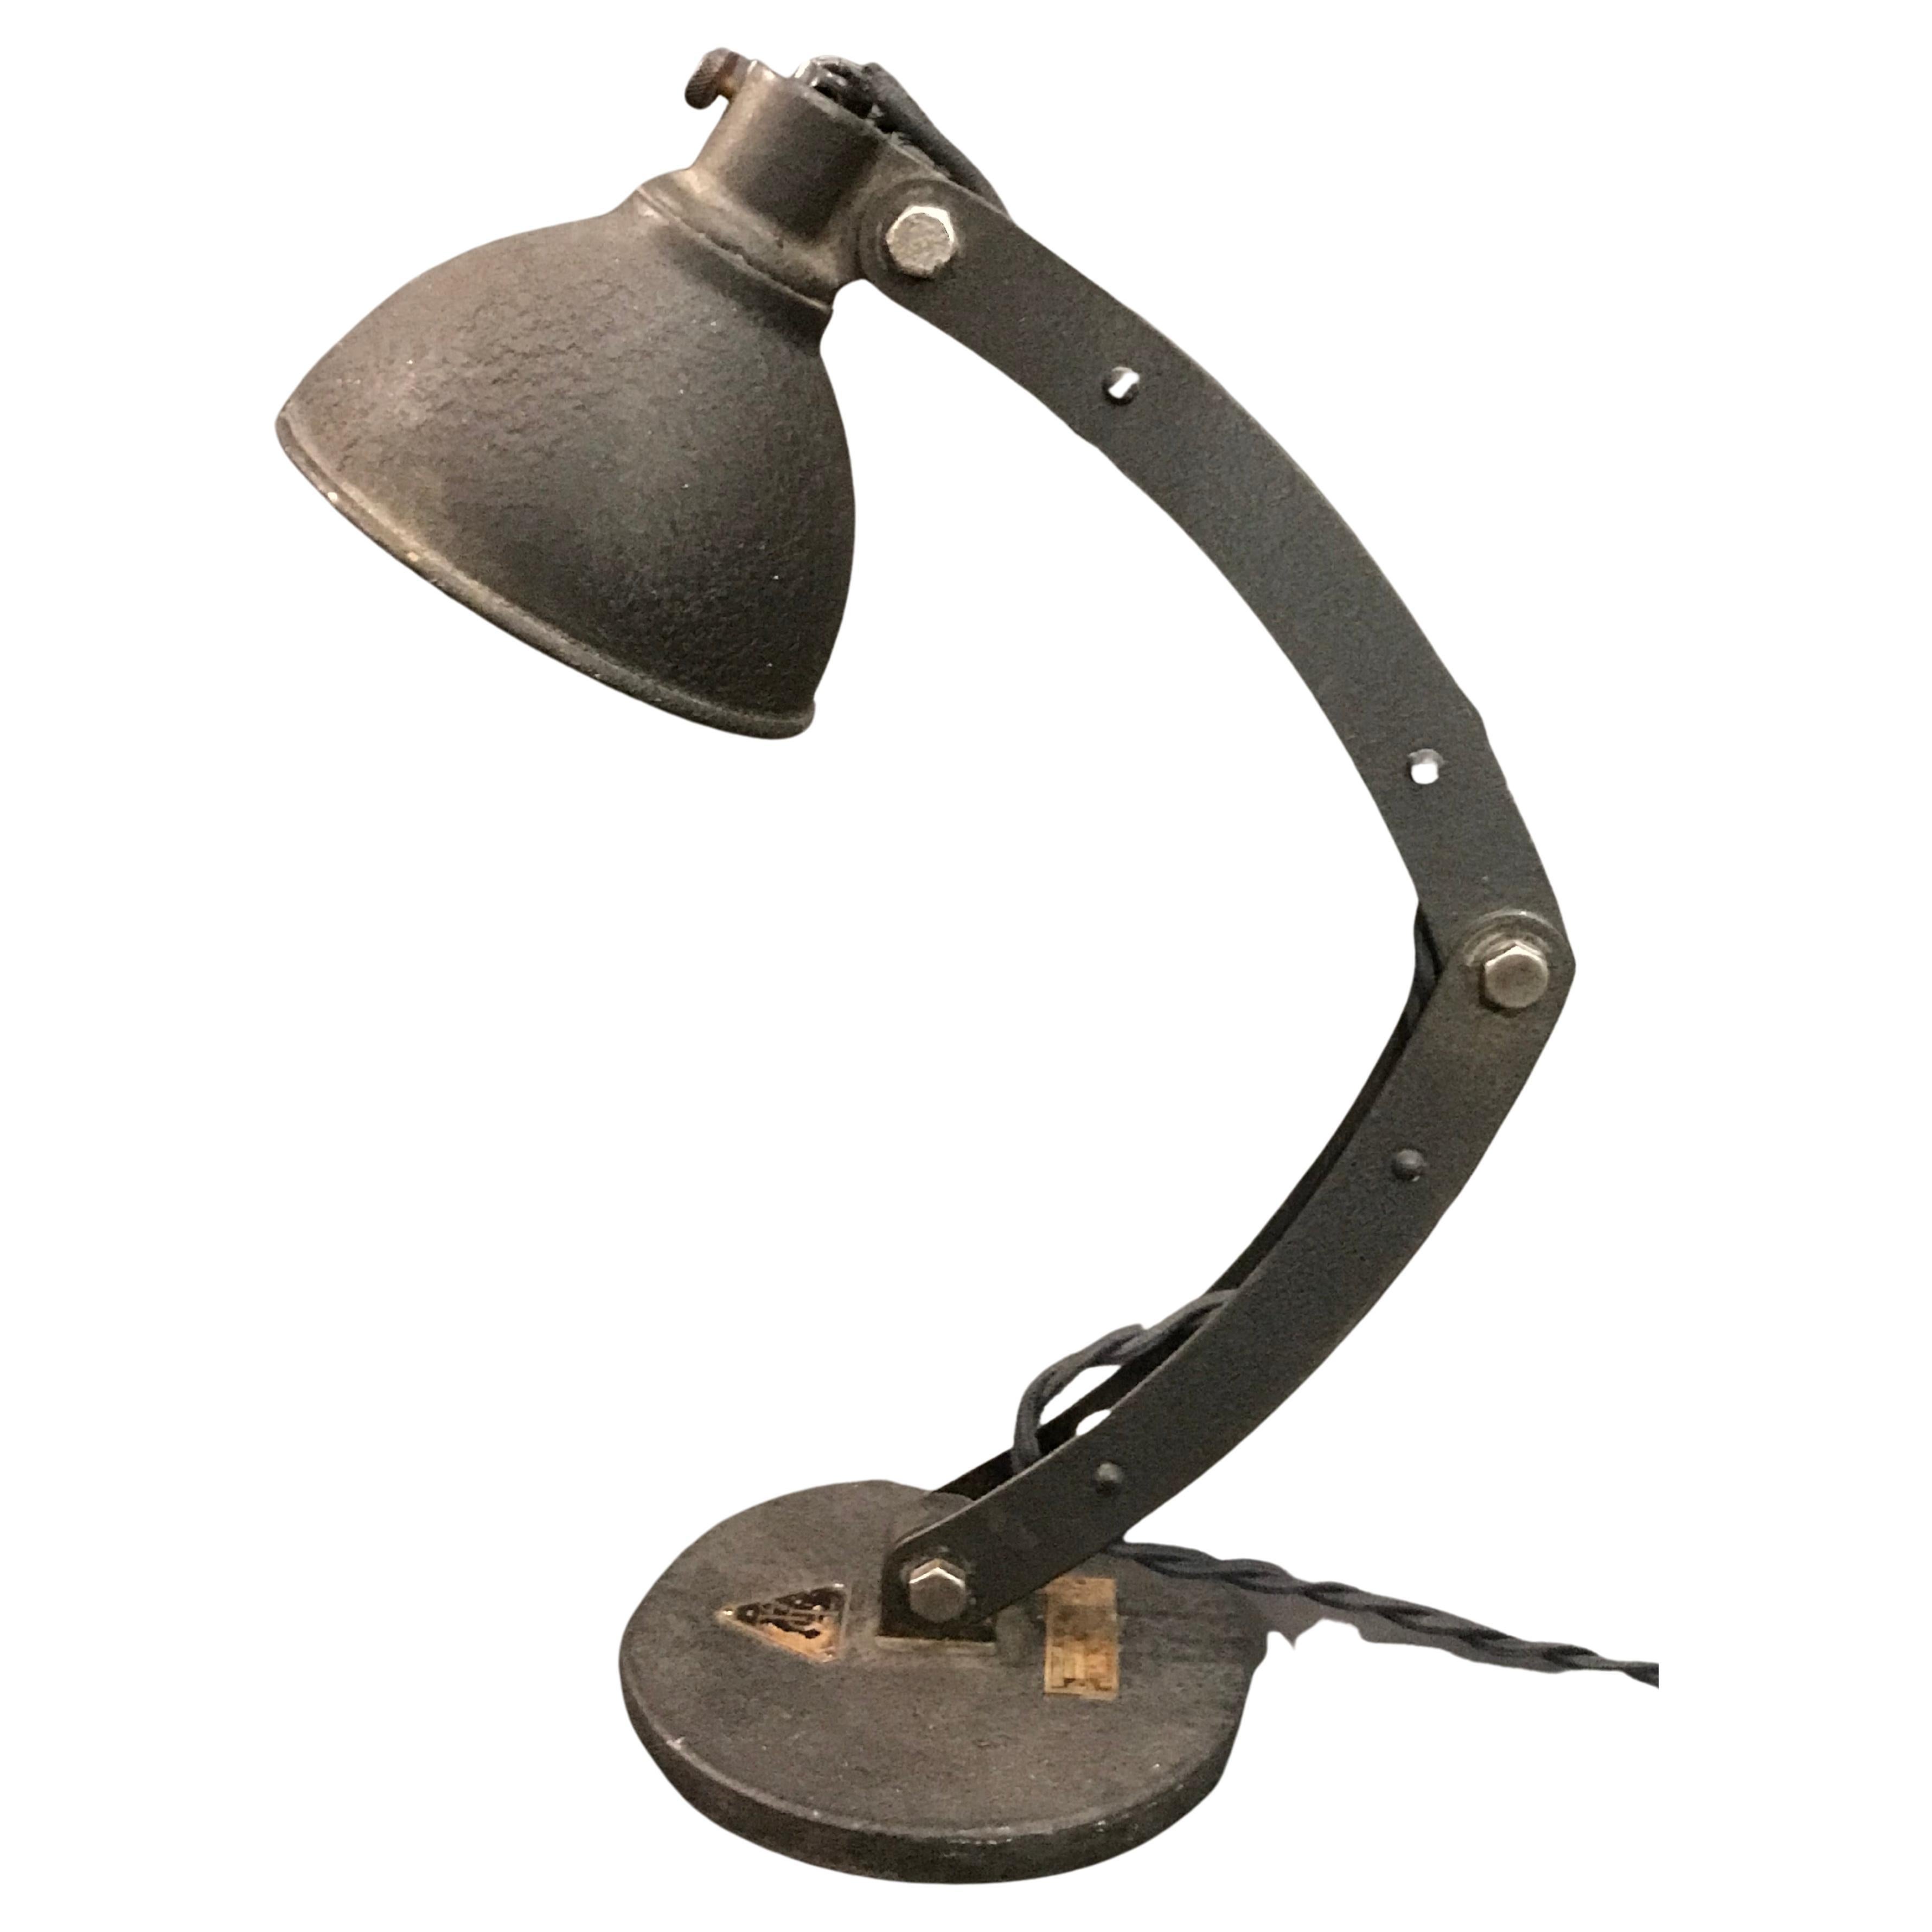 A rare 1931 Bausch and Lomb articulating task lamp in textured black steel with original and irreplaceable high intensity medical grade reflector marked with the B&L Logo from the era. The minimal frame with three points of motion is set over a